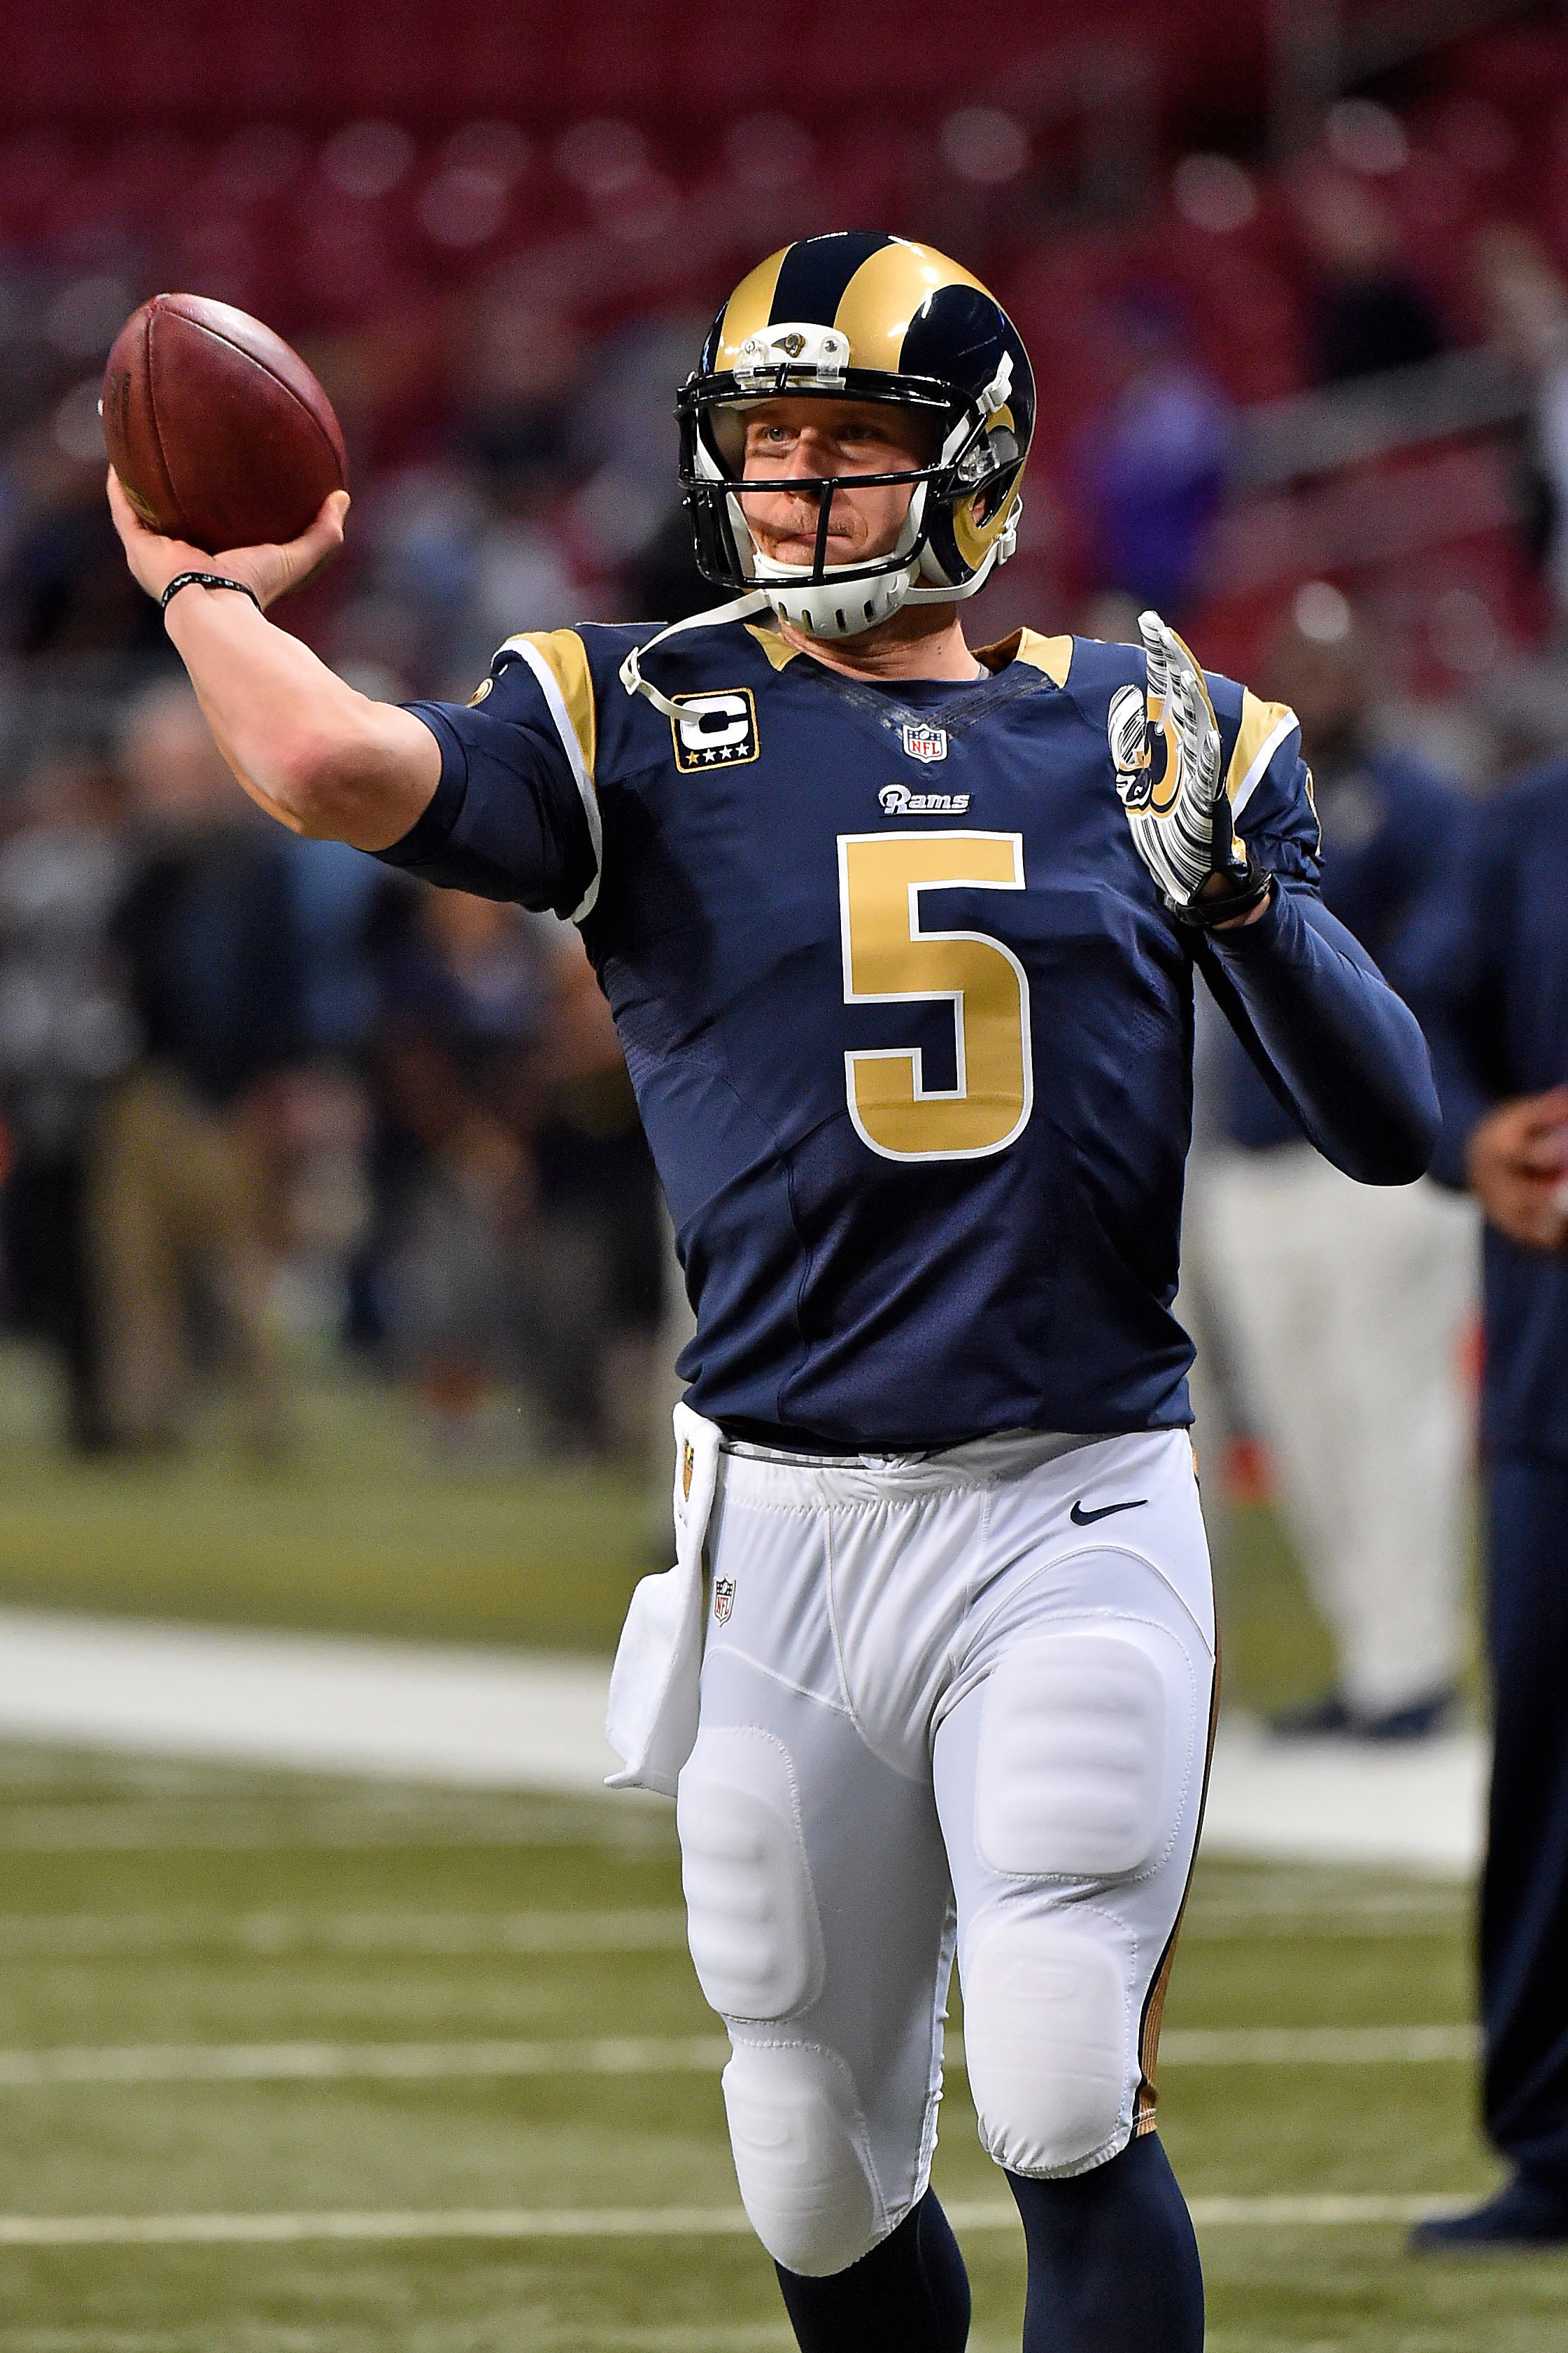 7 Teams That Could Trade For Nick Foles